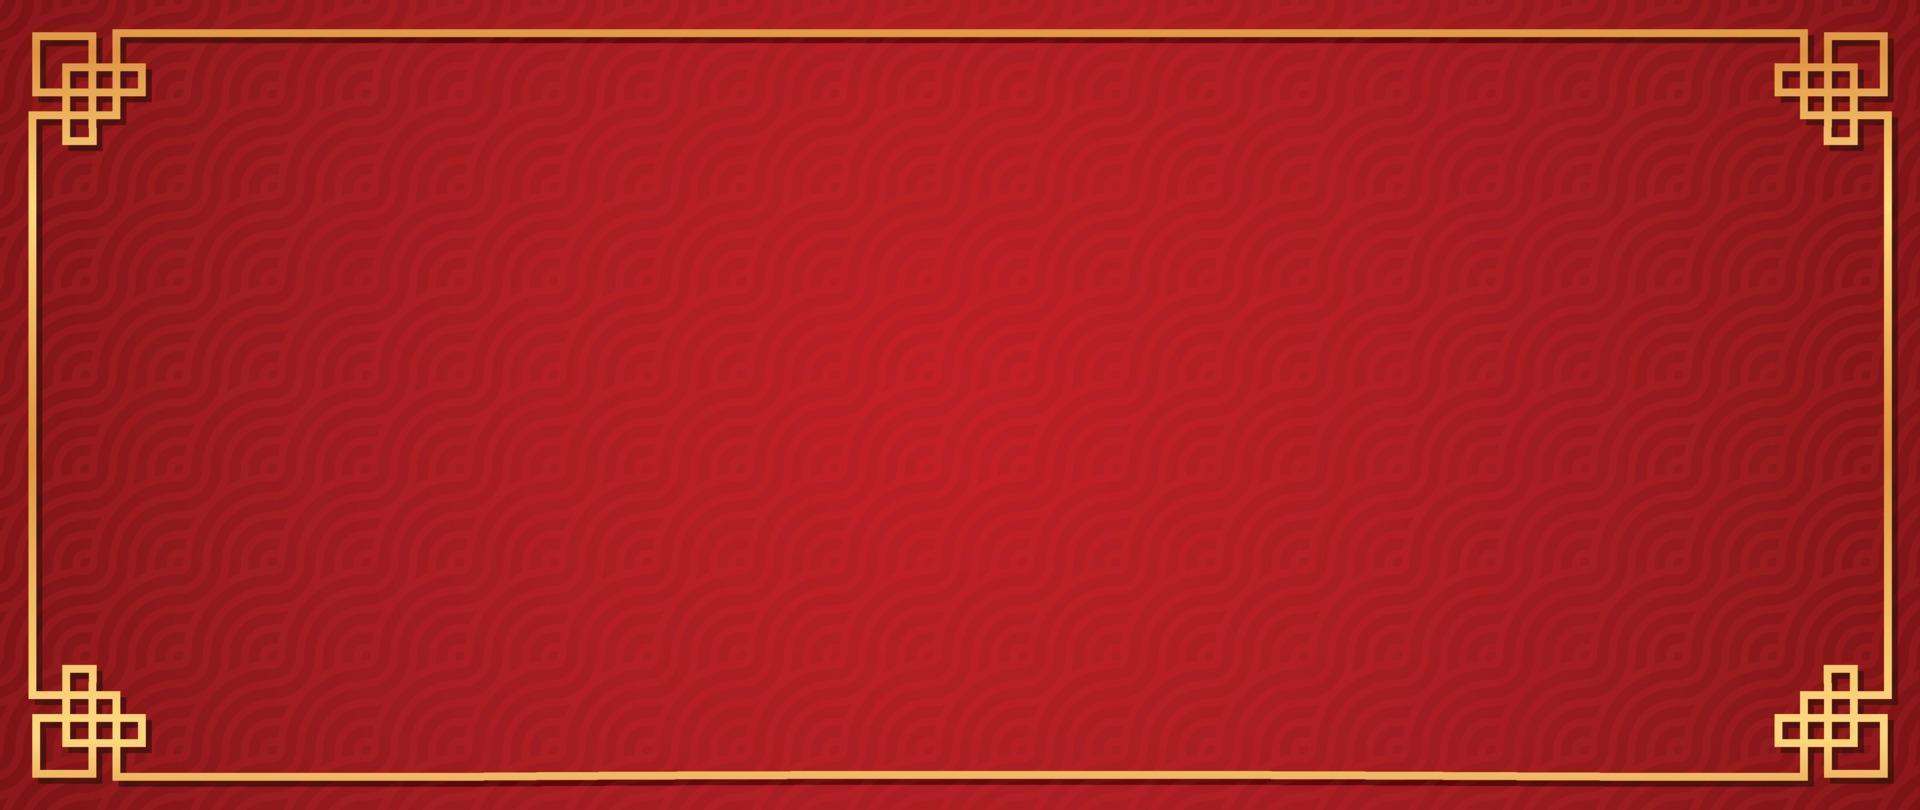 Happy Chinese New Year red background vector. Chinese and Japanese traditional pattern with geometric shapes, golden frame. Oriental style wallpaper for print, fabric, cover, banner, decoration. vector